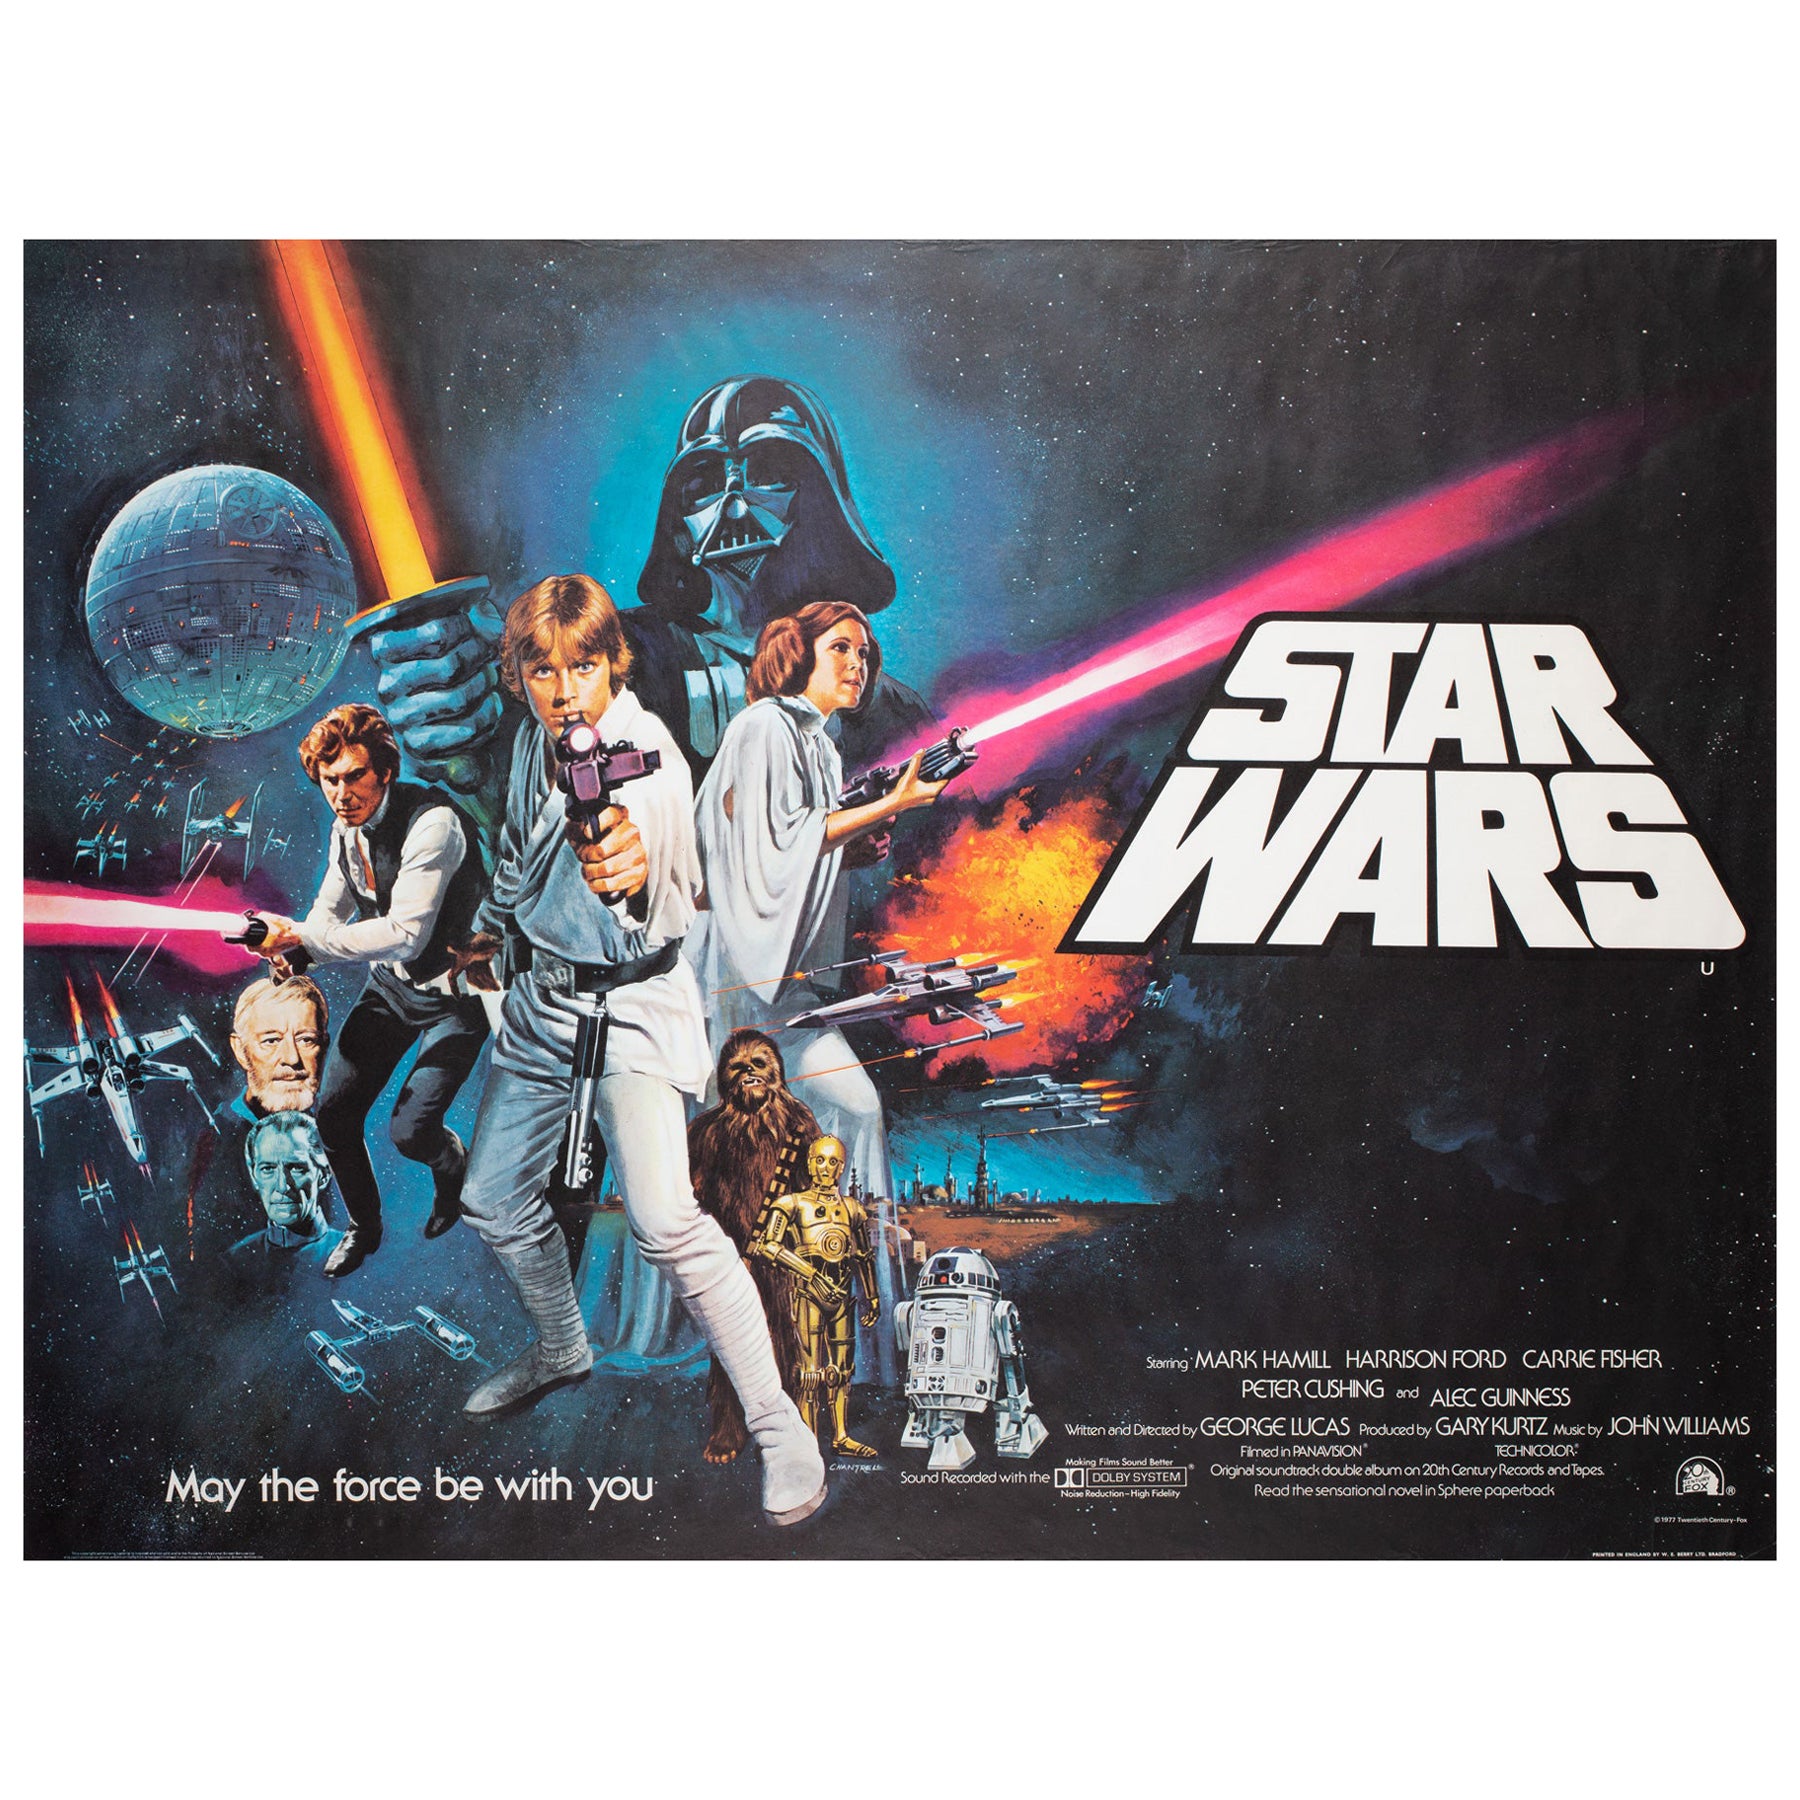 Star Wars 1977 Rolled UK Quad Style C Pre-Oscar Film Poster, Tom Chantrell For Sale